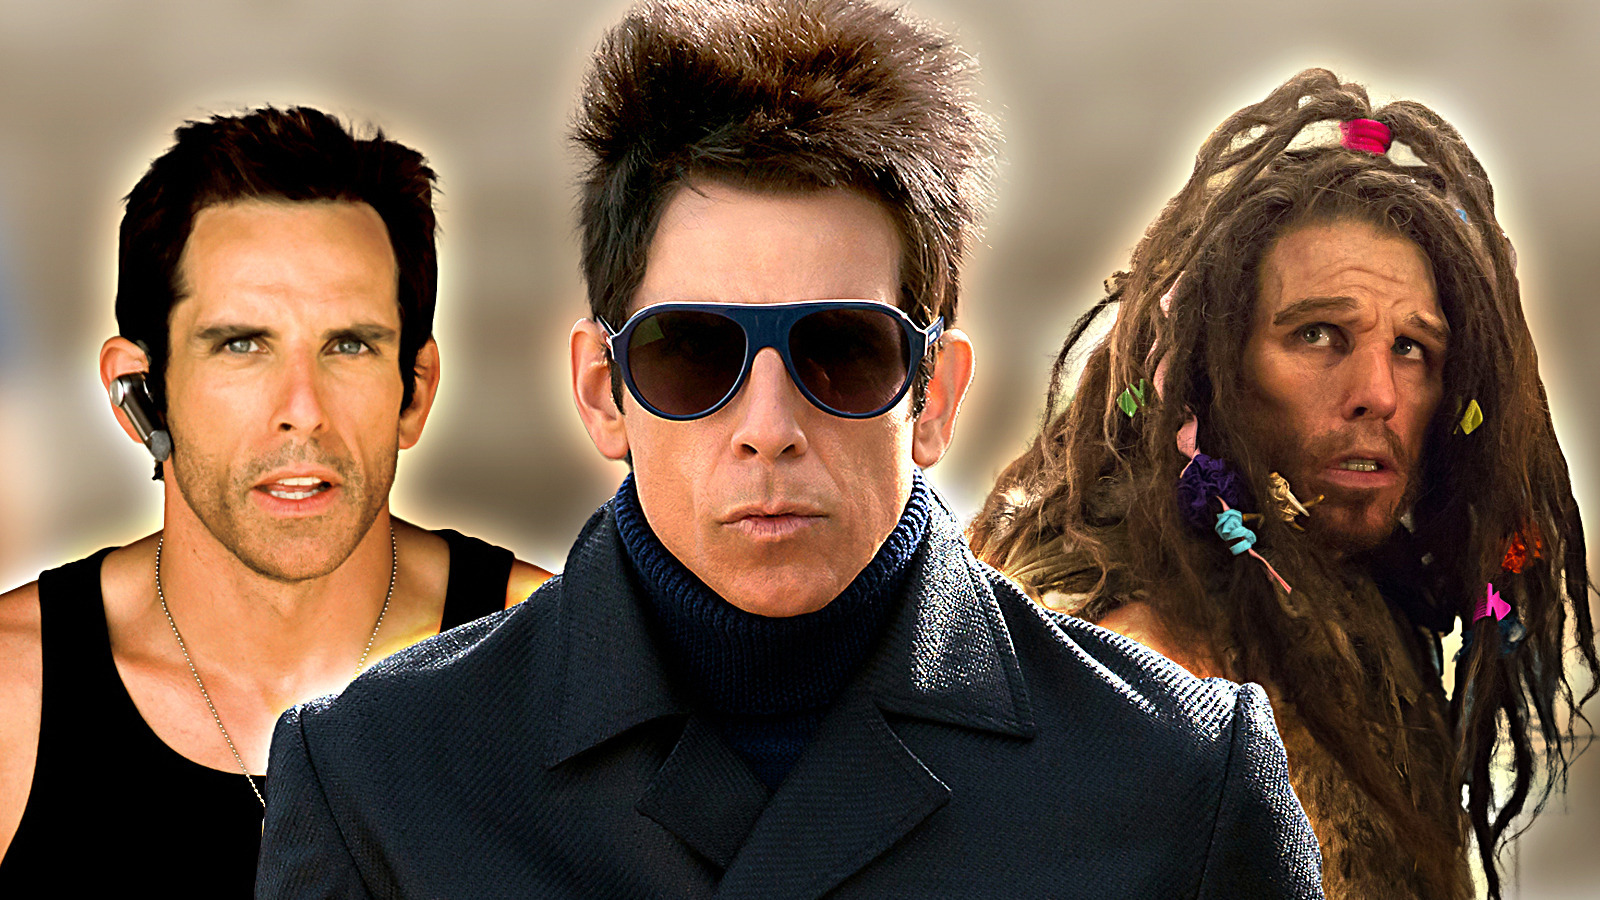 Ben Stiller’s Comedy Disaster Sends Him into Panic Mode – Find Out What Went Wrong!